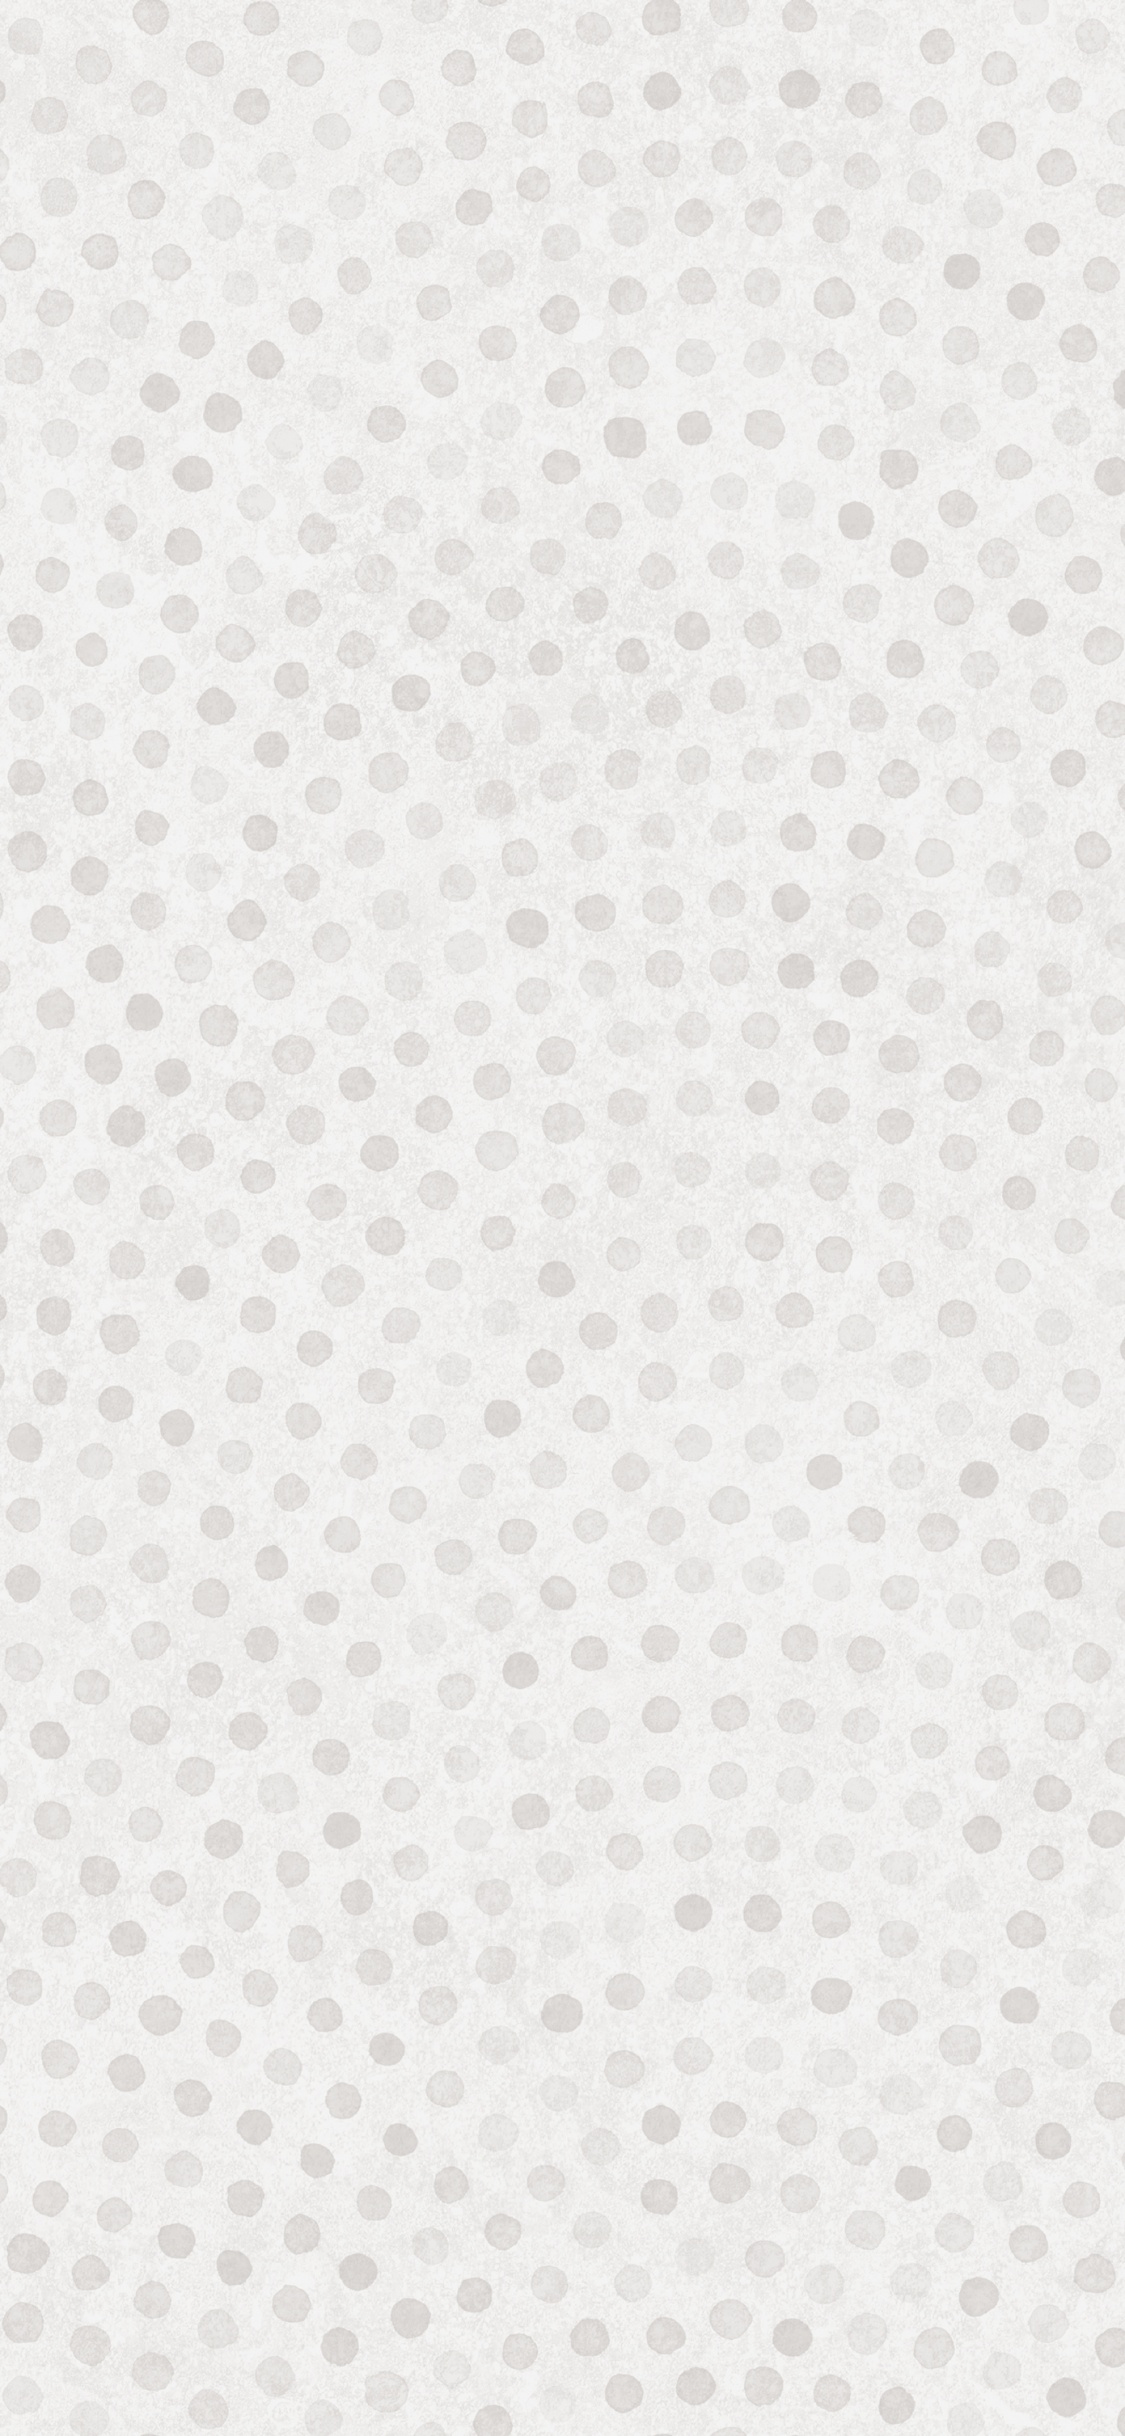 White and Black Polka Dot Textile. Wallpaper in 1125x2436 Resolution